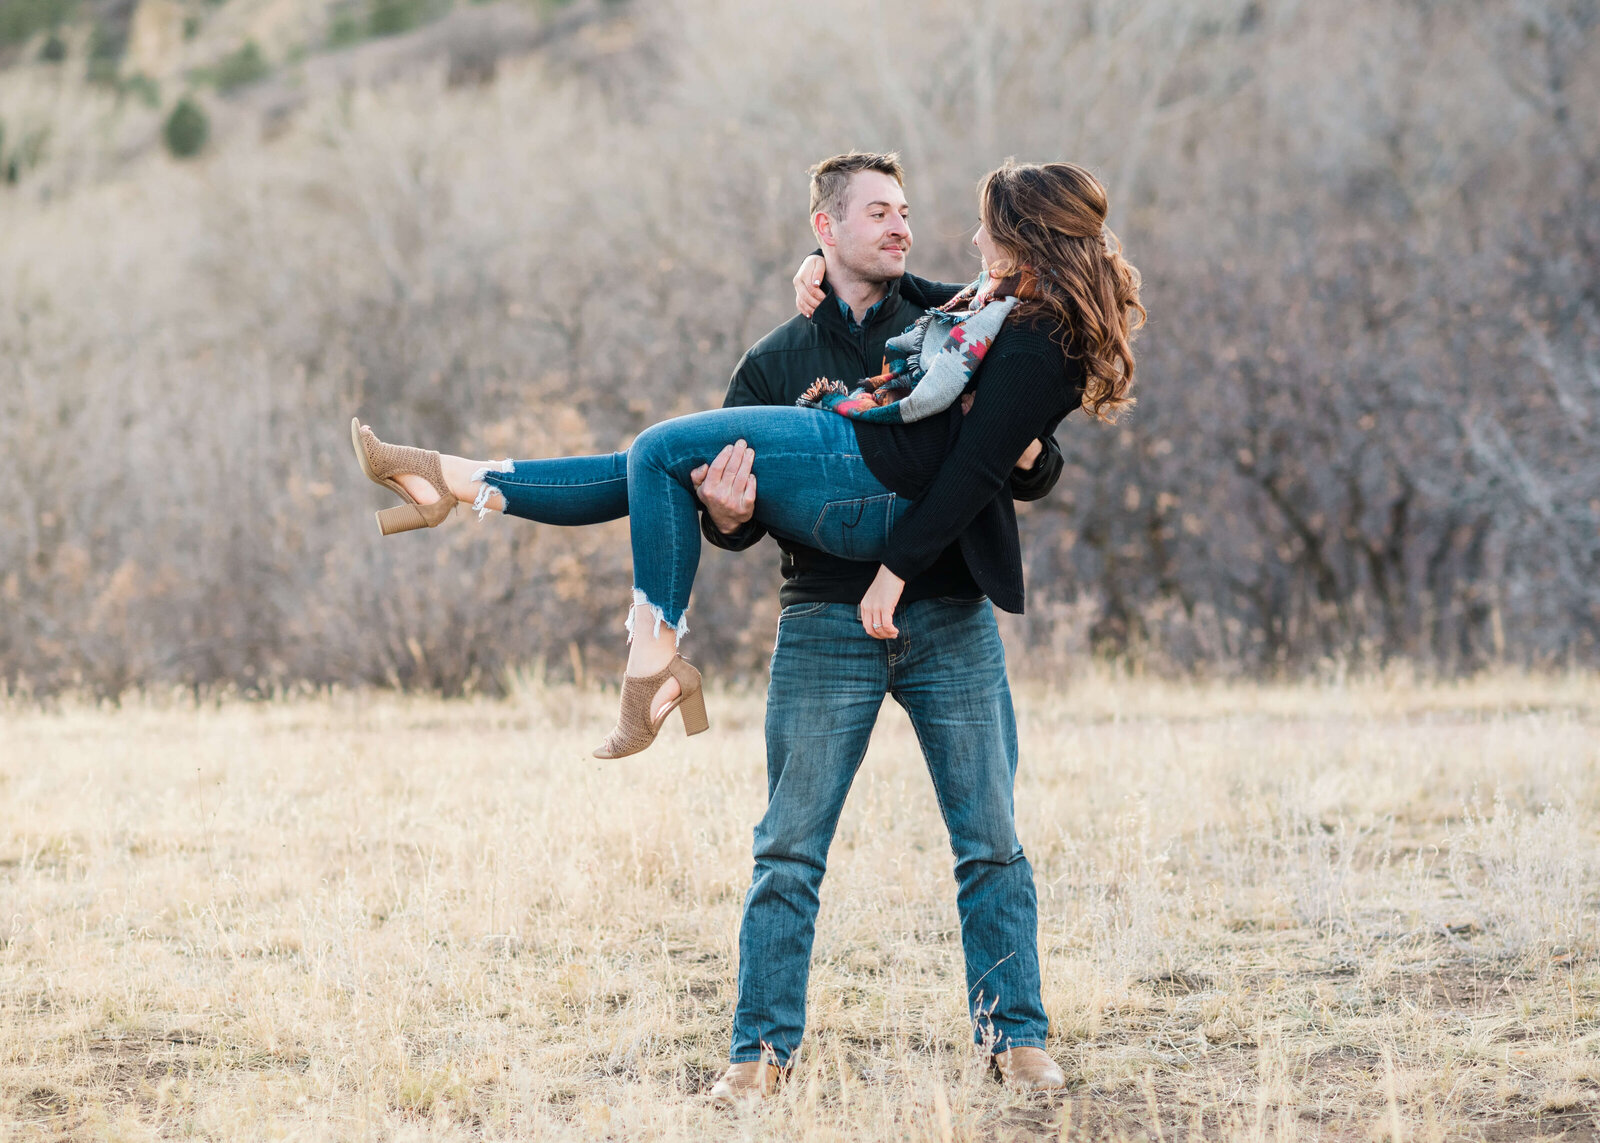 Man holds his fiance in a playful moment during their engagement photo session